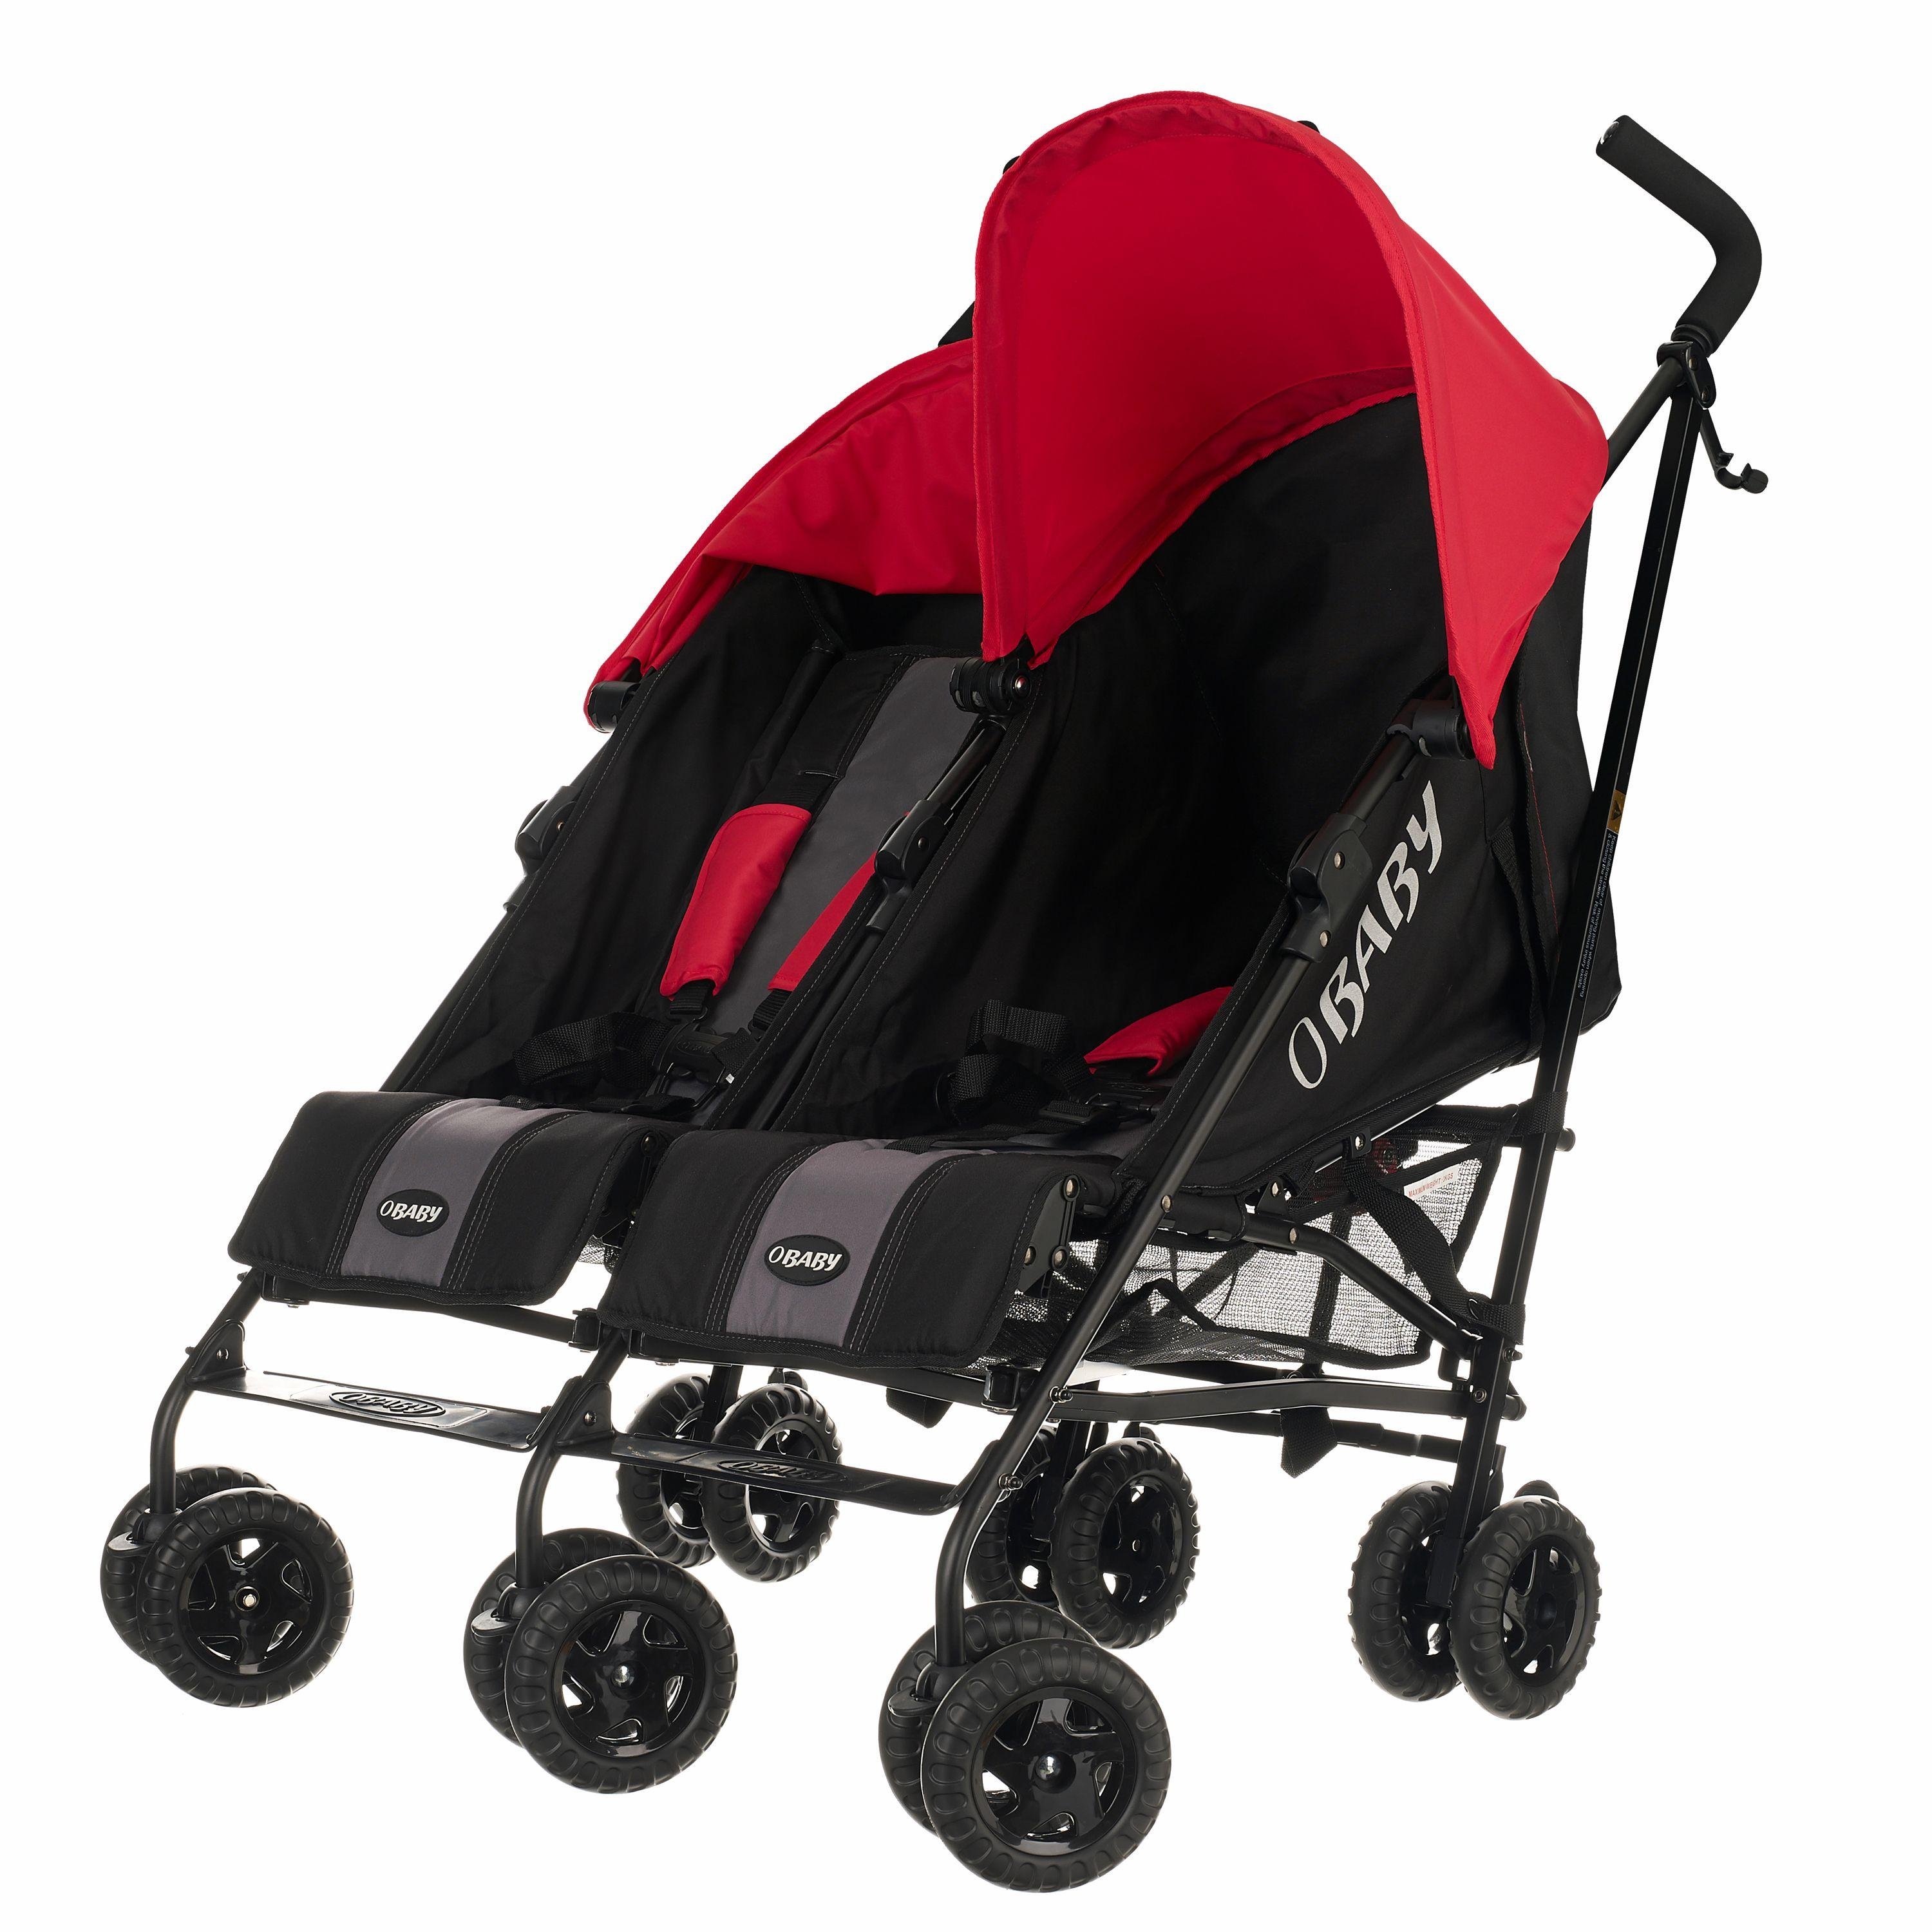 Obaby Apollo Black and Grey Double Pushchair Review